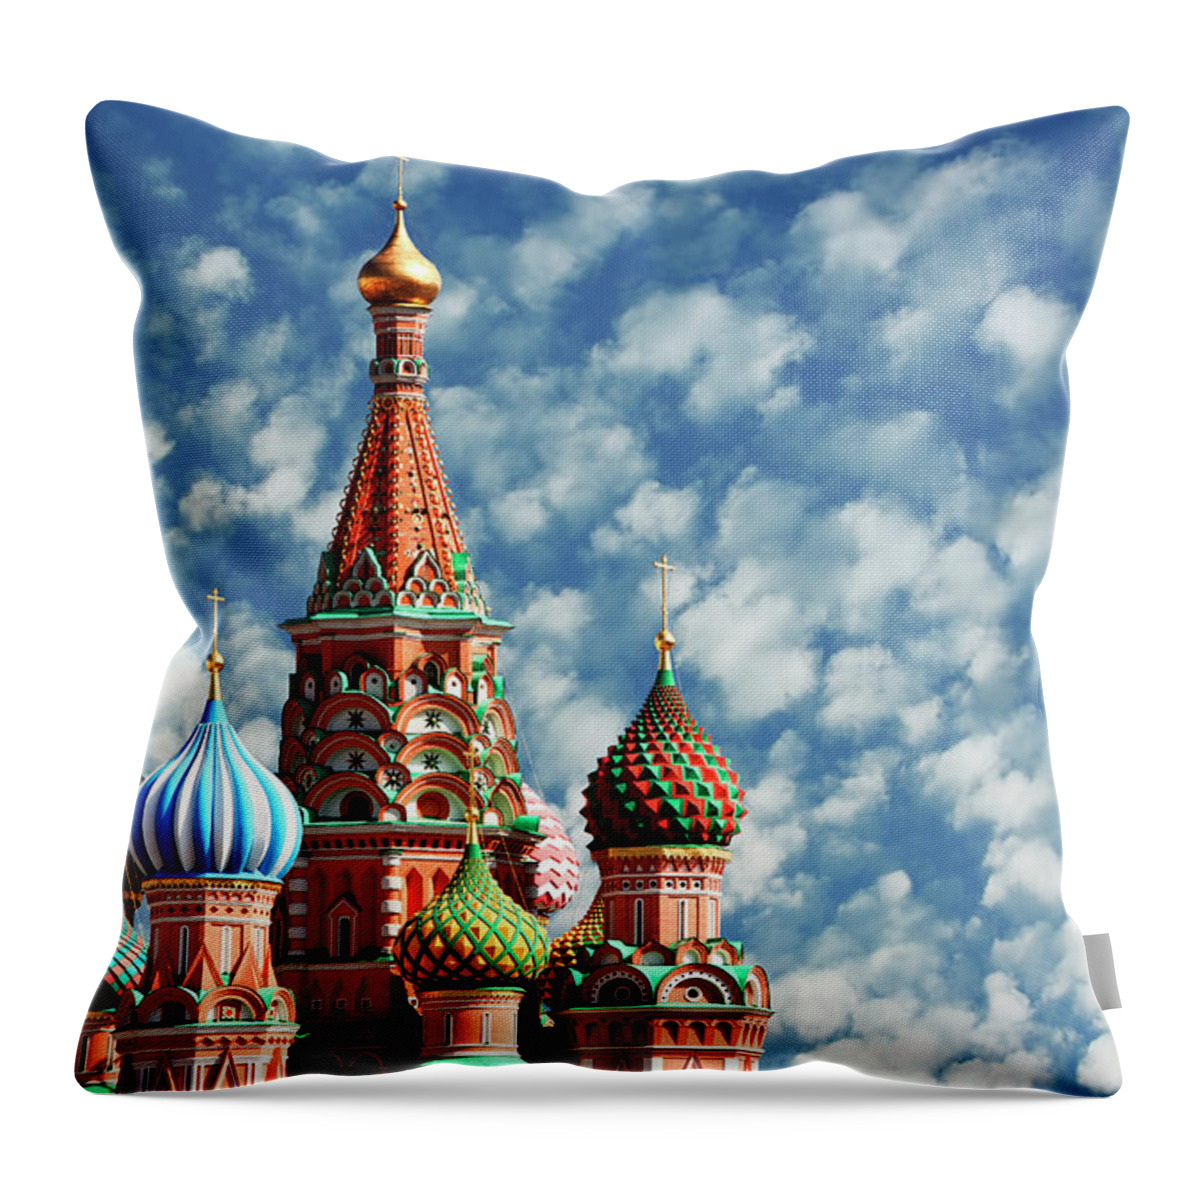 Built Structure Throw Pillow featuring the photograph St.basil Cathedral, Moscow, Russia by Tunart